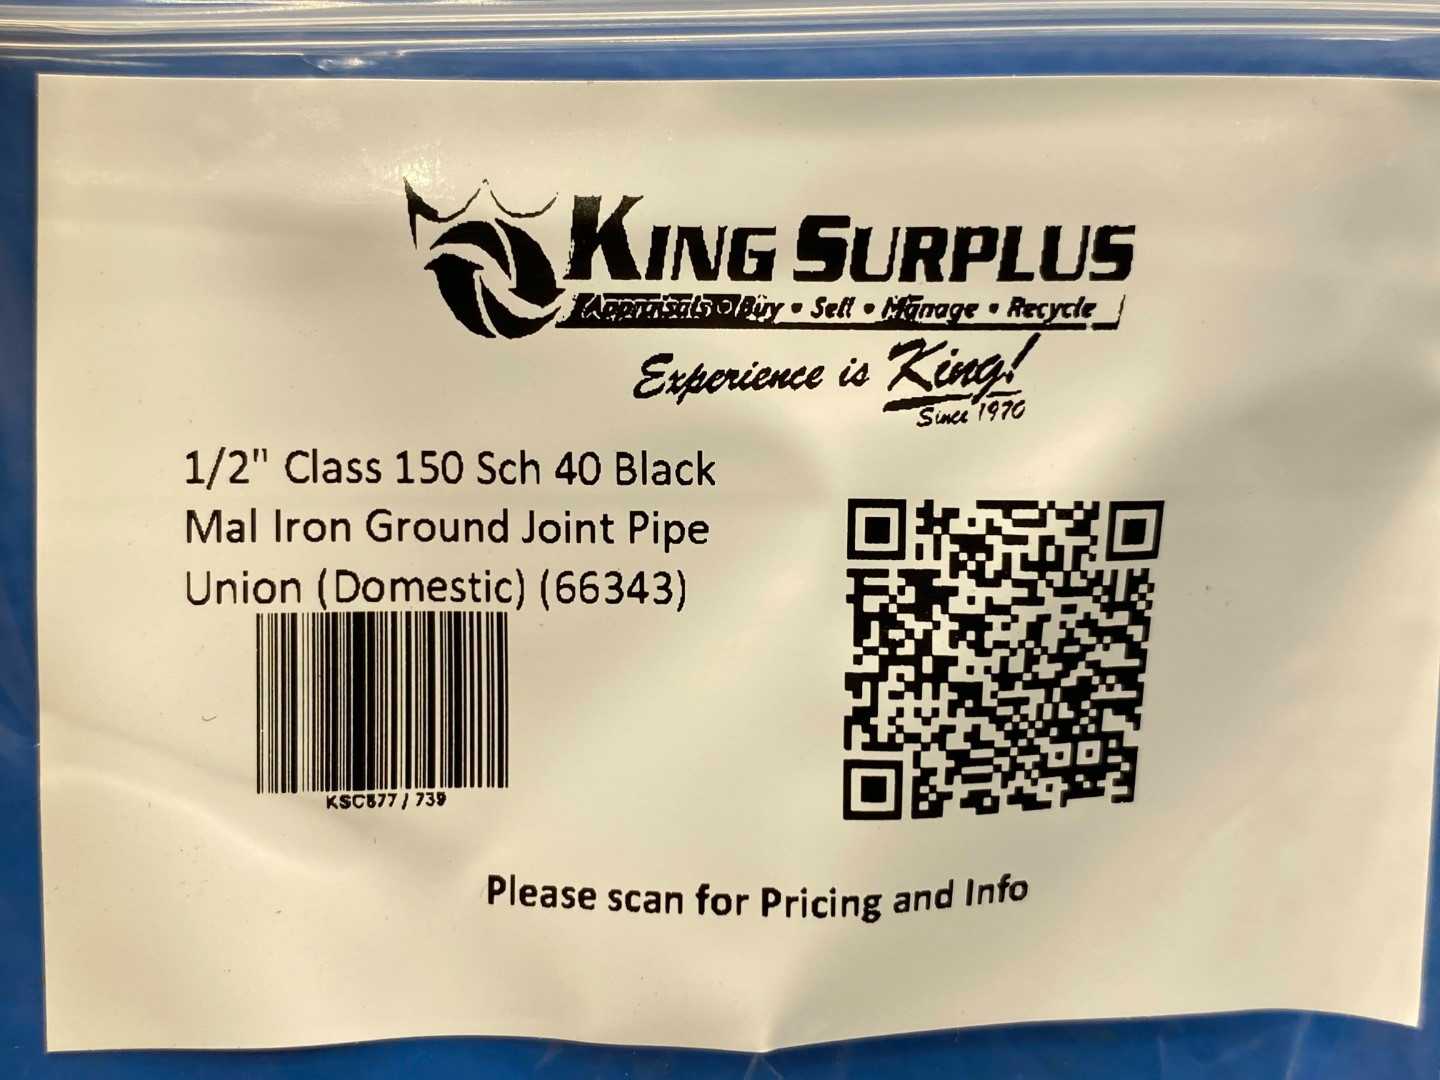 1/2" Class 150 Sch 40 Black Mal Iron Ground Joint Pipe Union (Domestic) (66343)